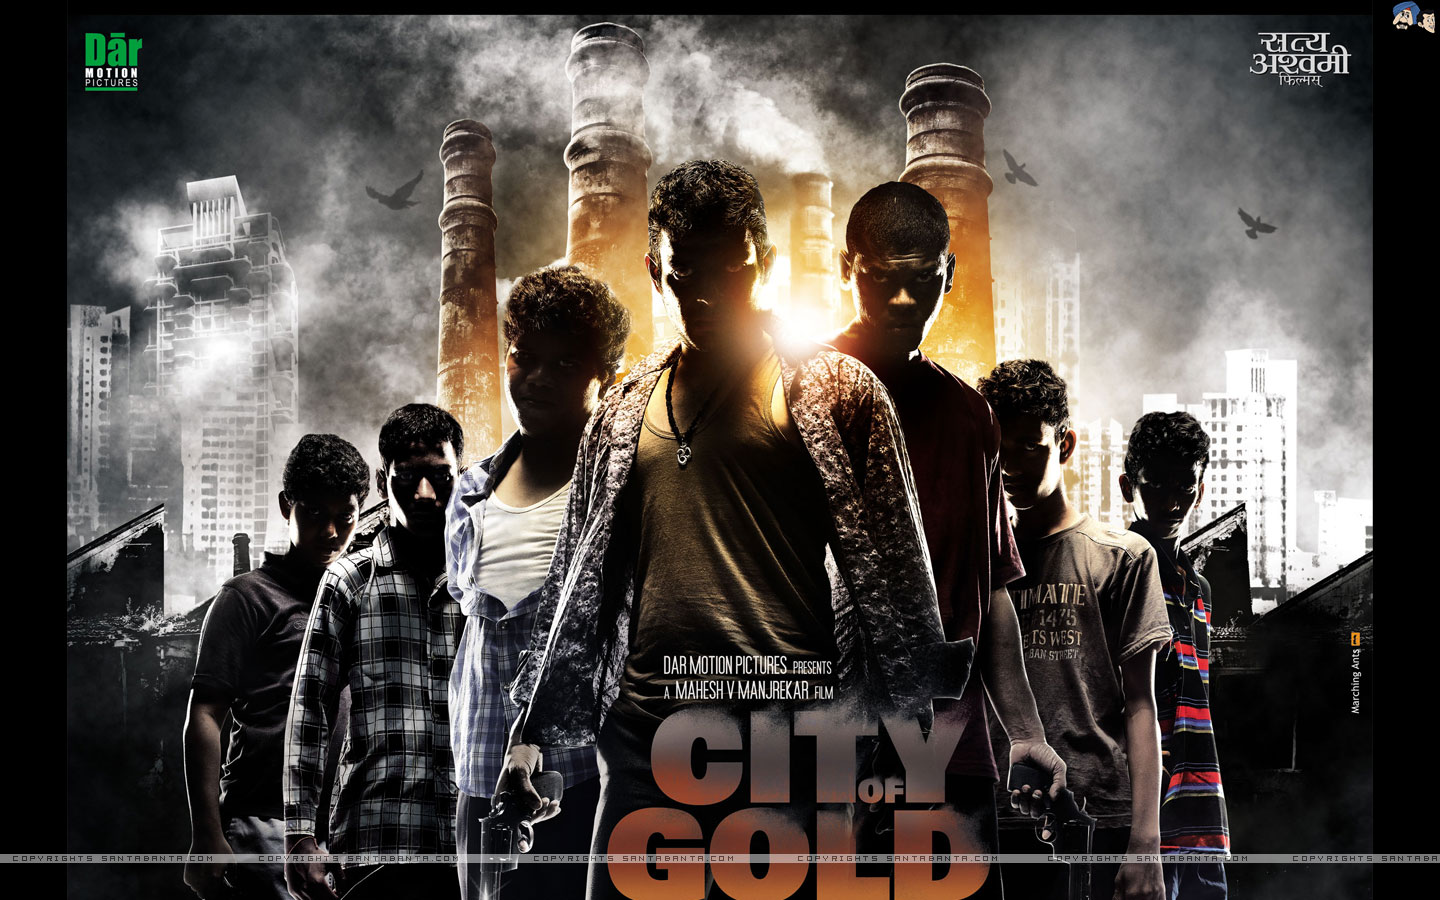 City of gold